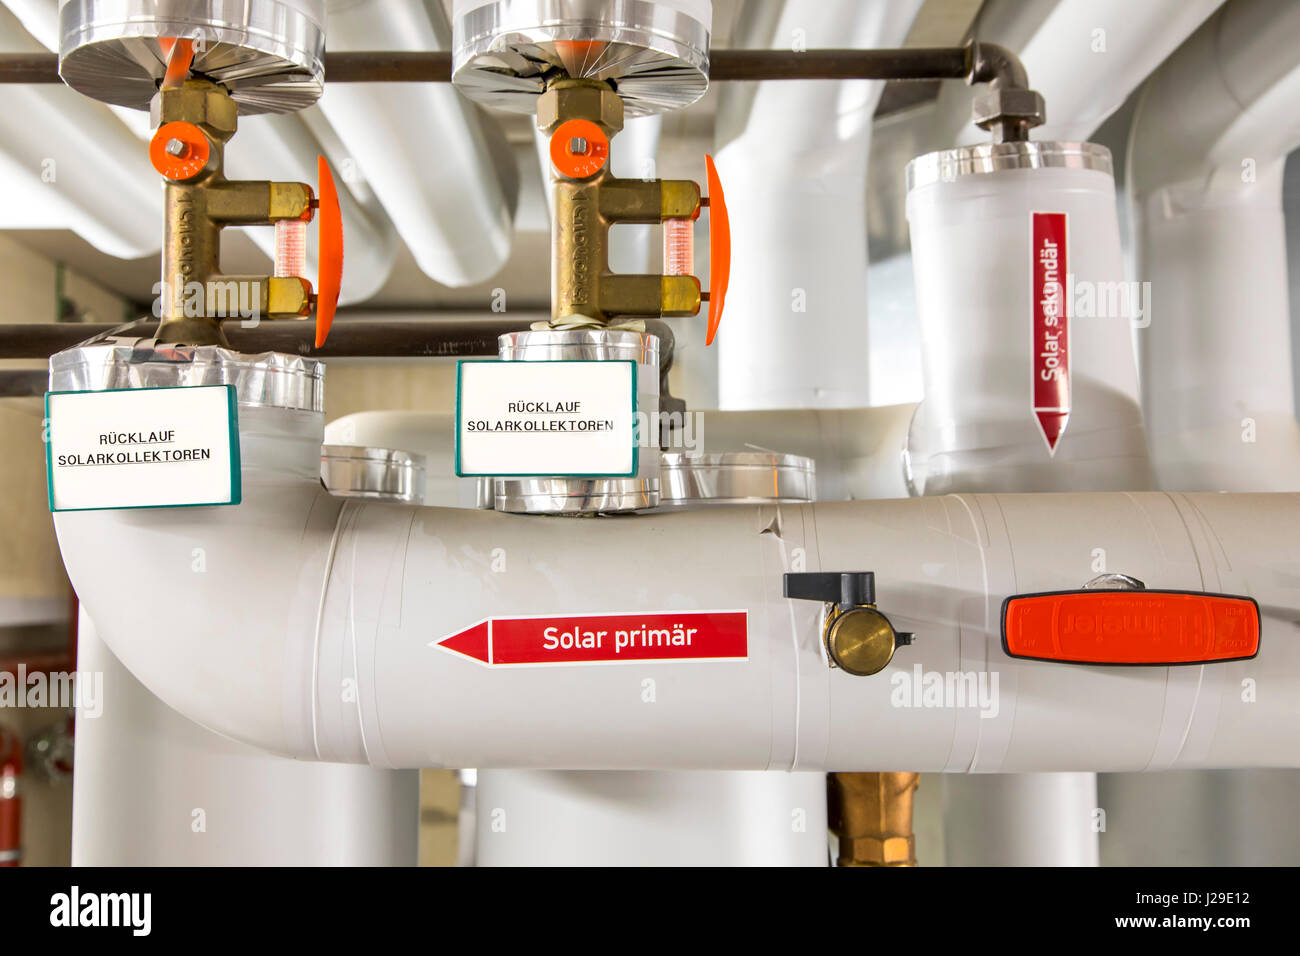 https://c8.alamy.com/comp/J29E12/pipelines-in-a-heating-boiler-water-circuit-of-hot-water-heated-by-J29E12.jpg